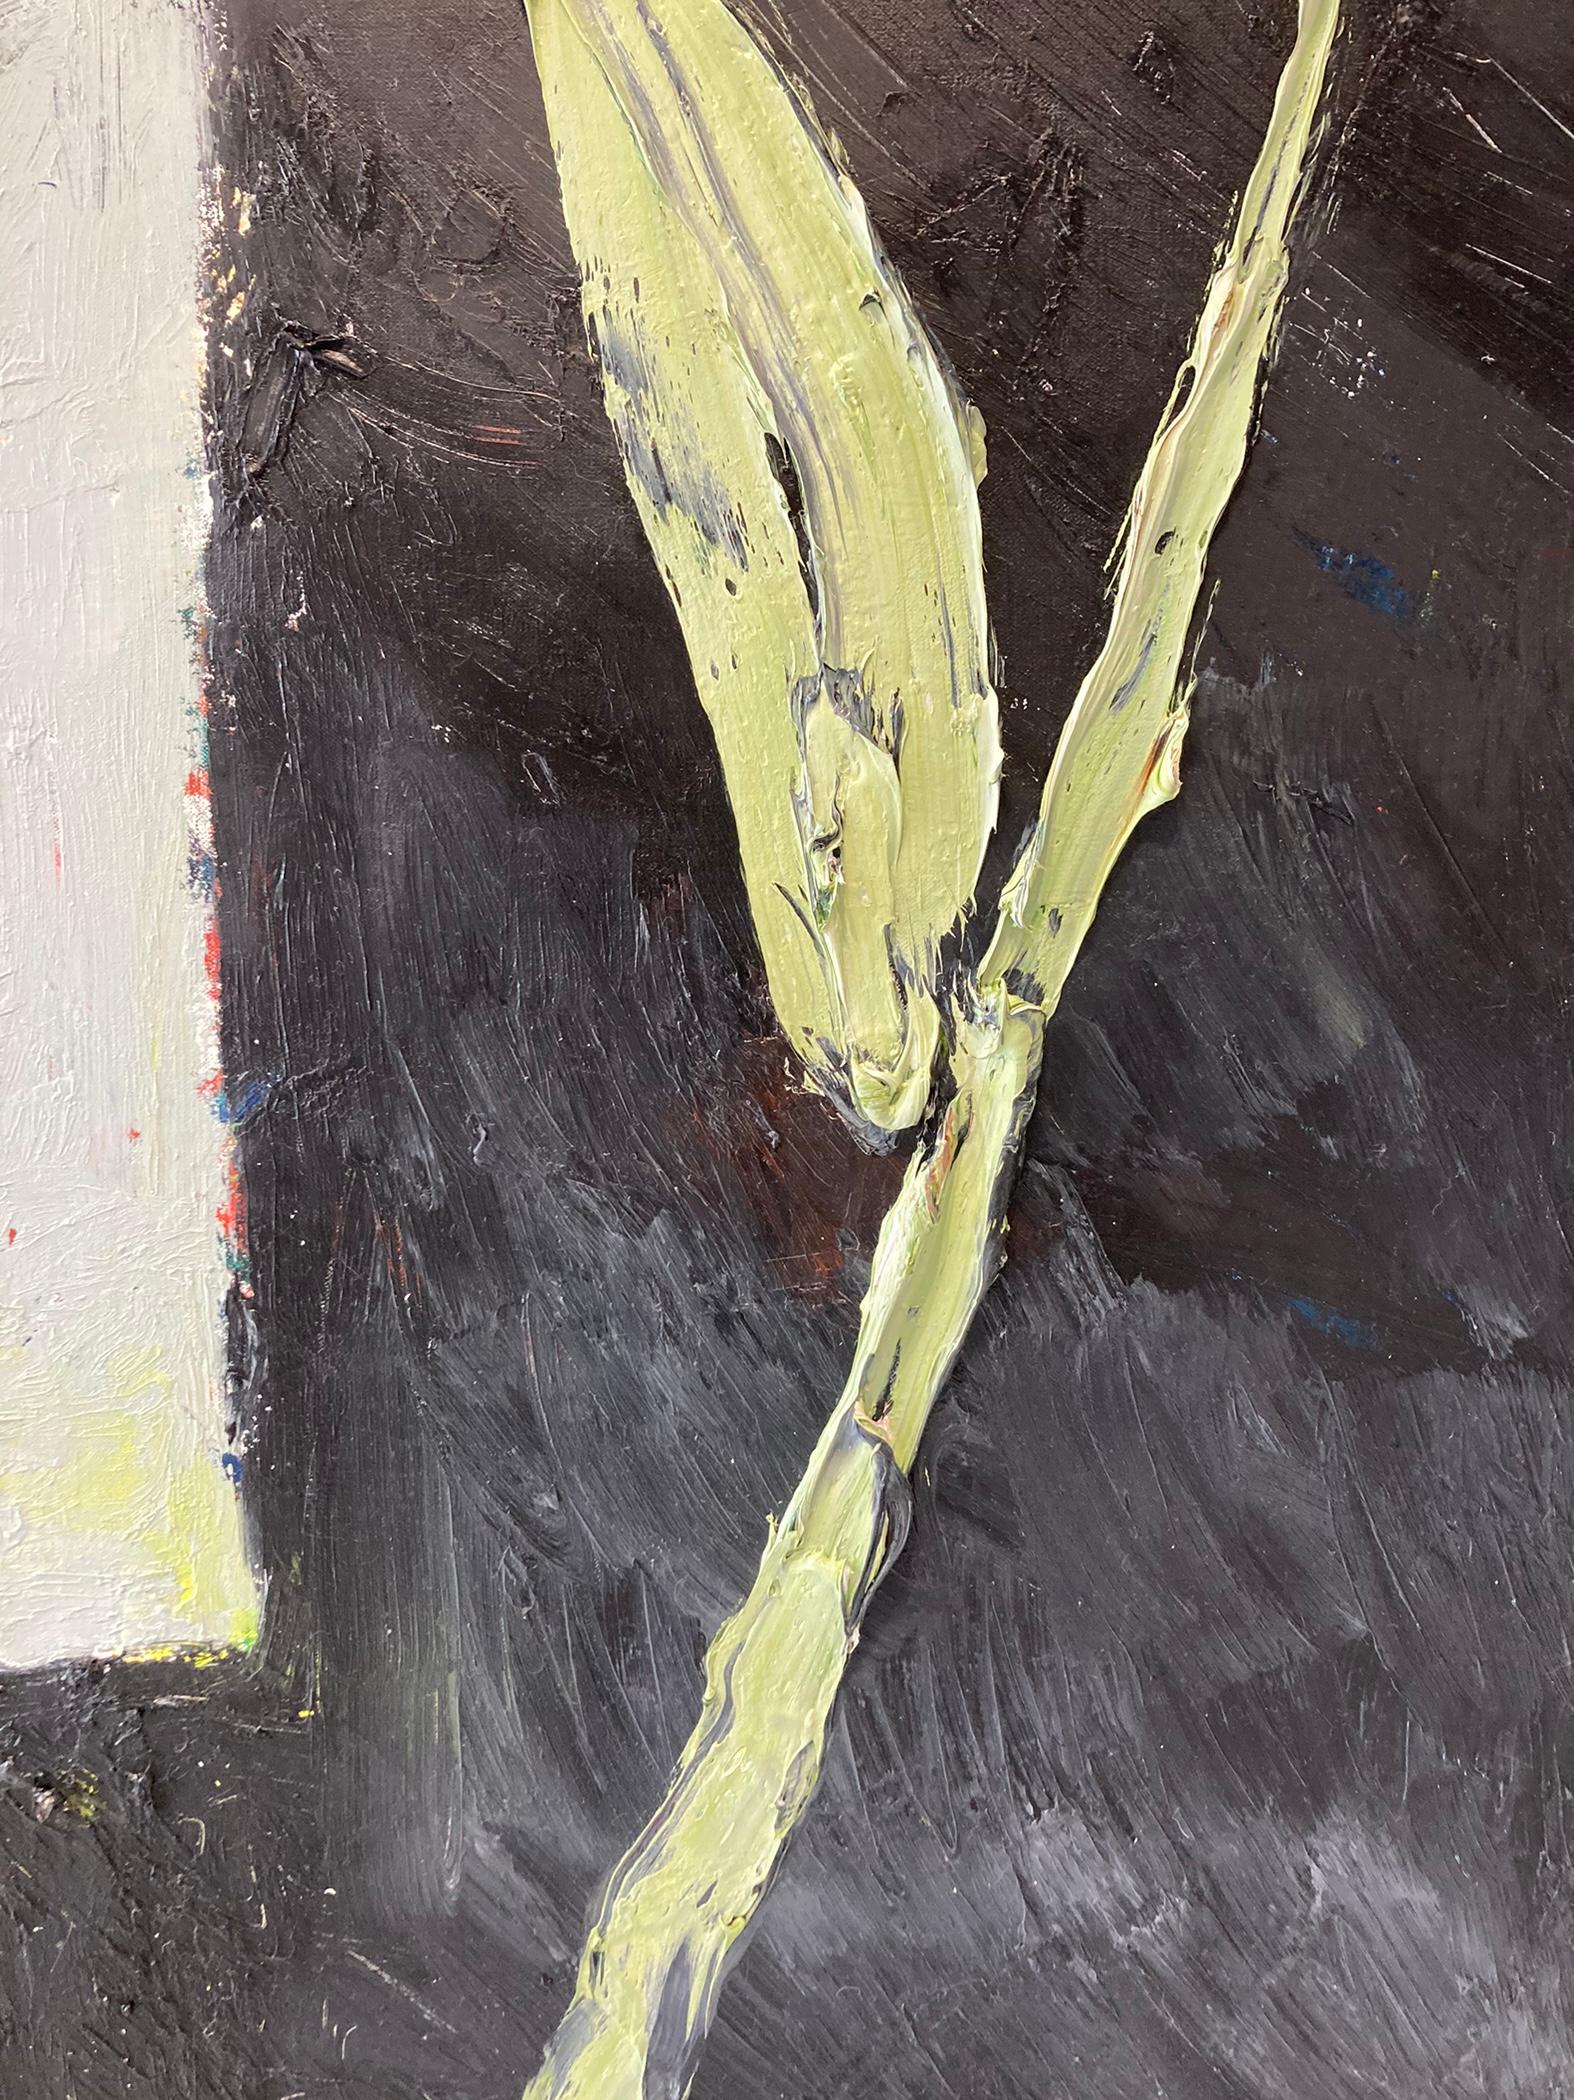 An abstract painting of a single lily. The lily sits on the righthand side of the composition against a textured black background. The sage green, grey field on the left of the composition could be a window, with a cool winter like brightness